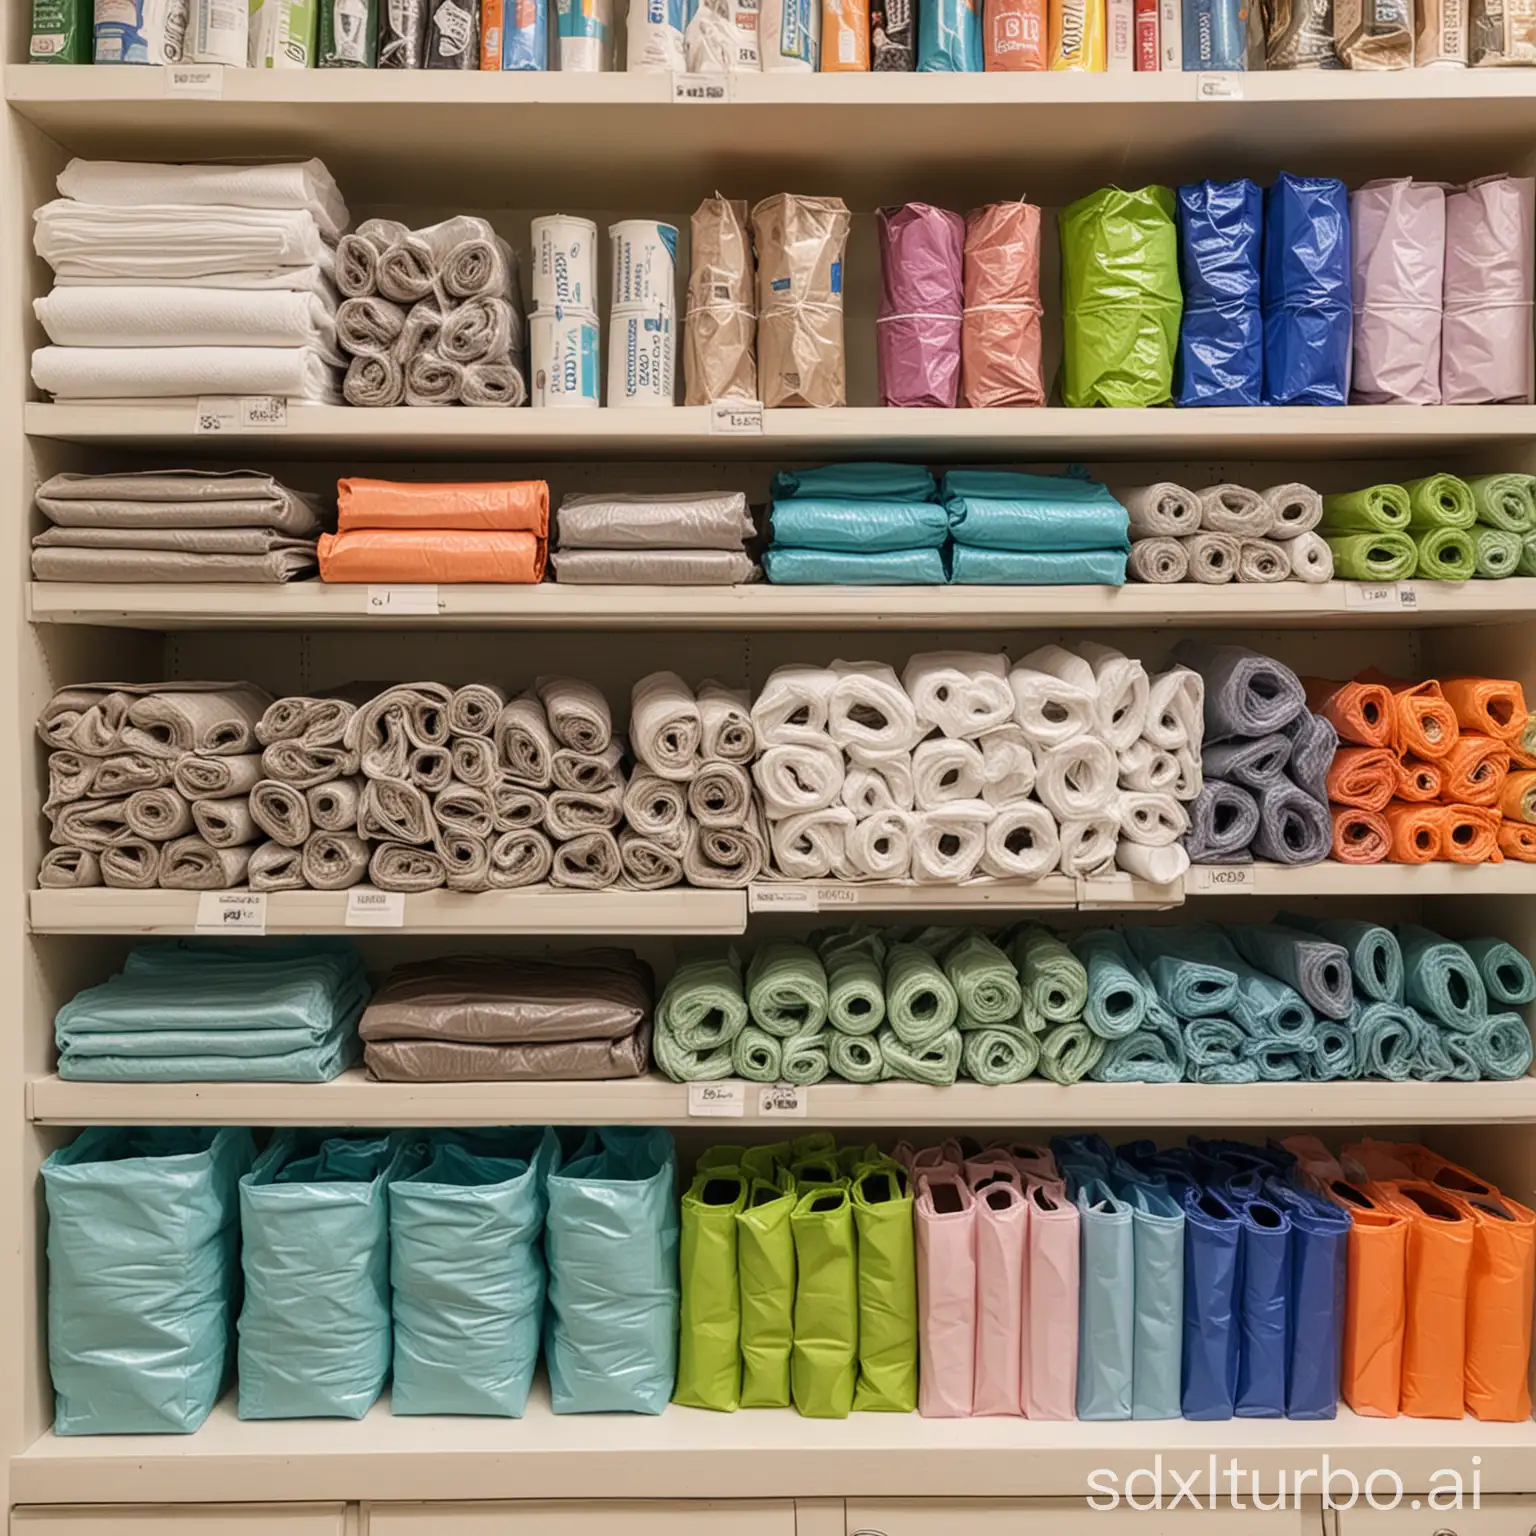 Neatly-Organized-Household-Supplies-on-Shelf-Brightly-Colored-and-Textured-Products